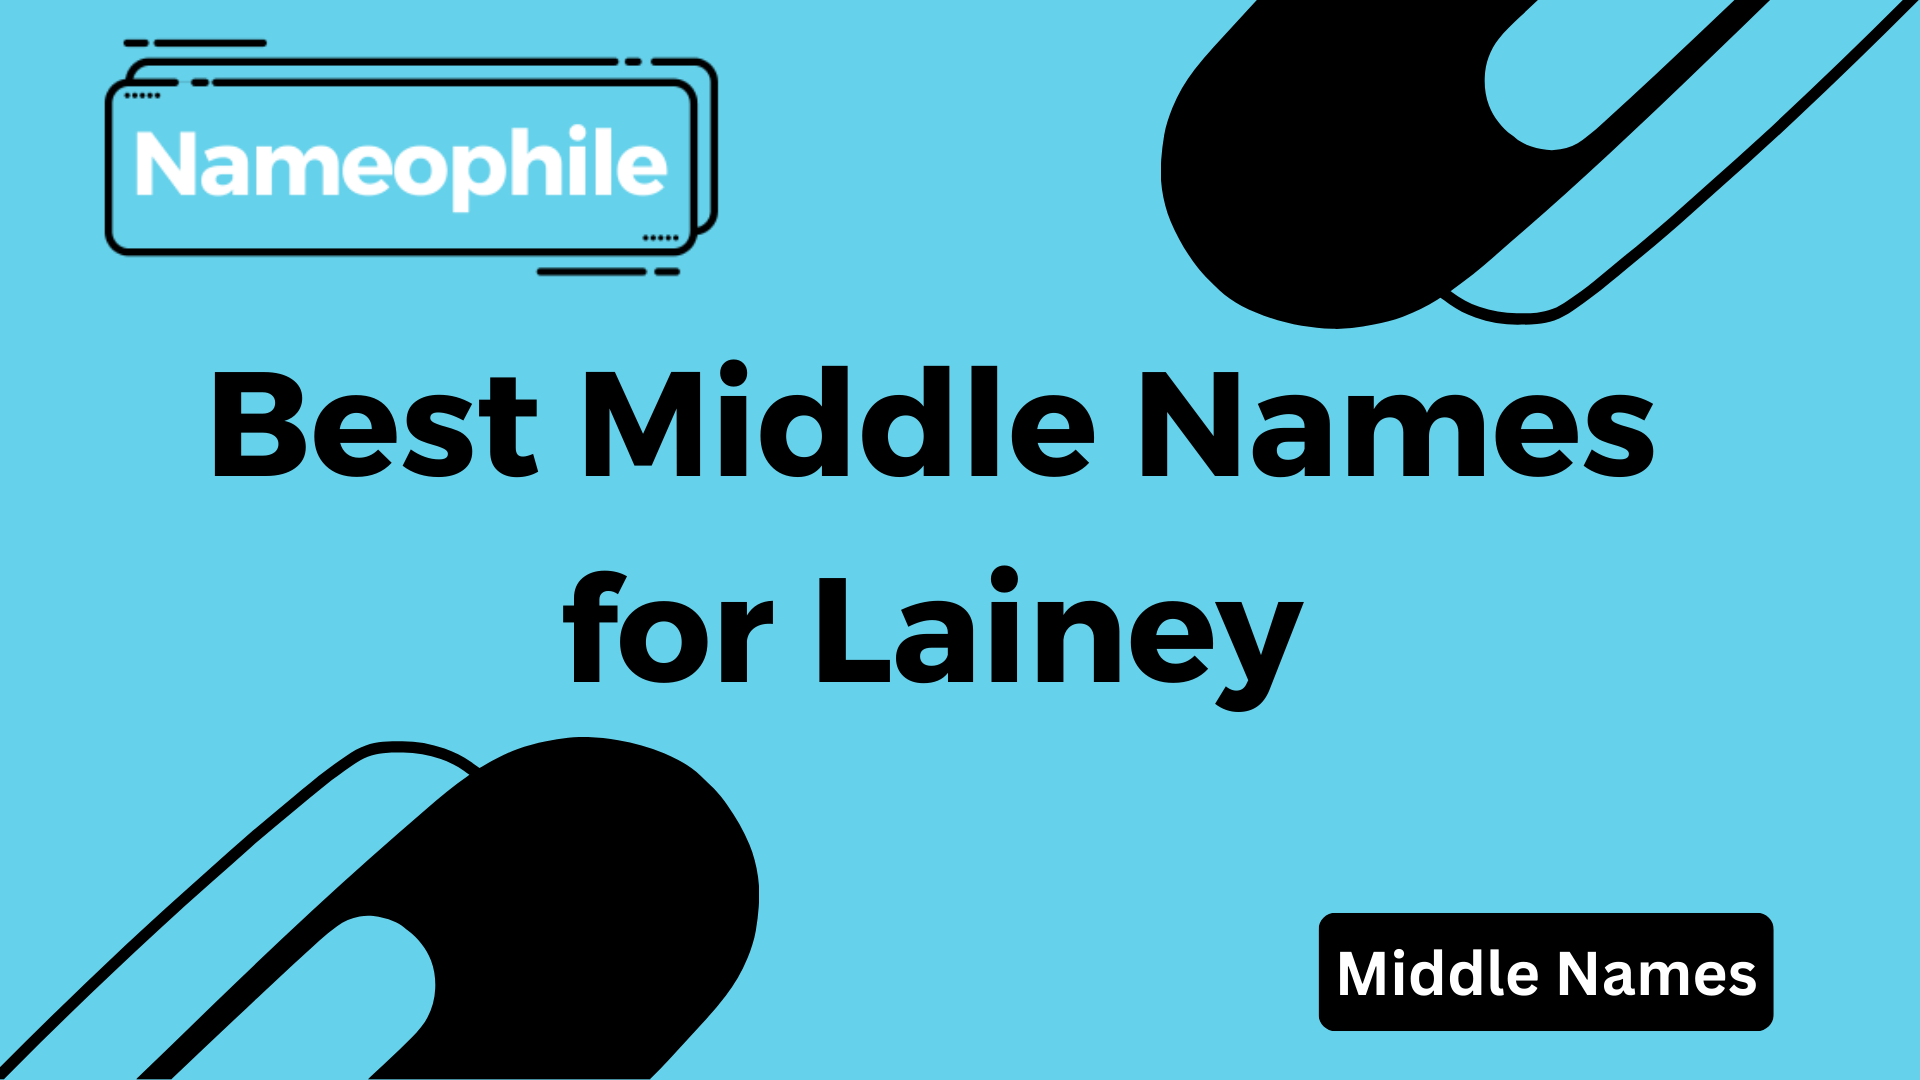 Best Middle Names for Lainey